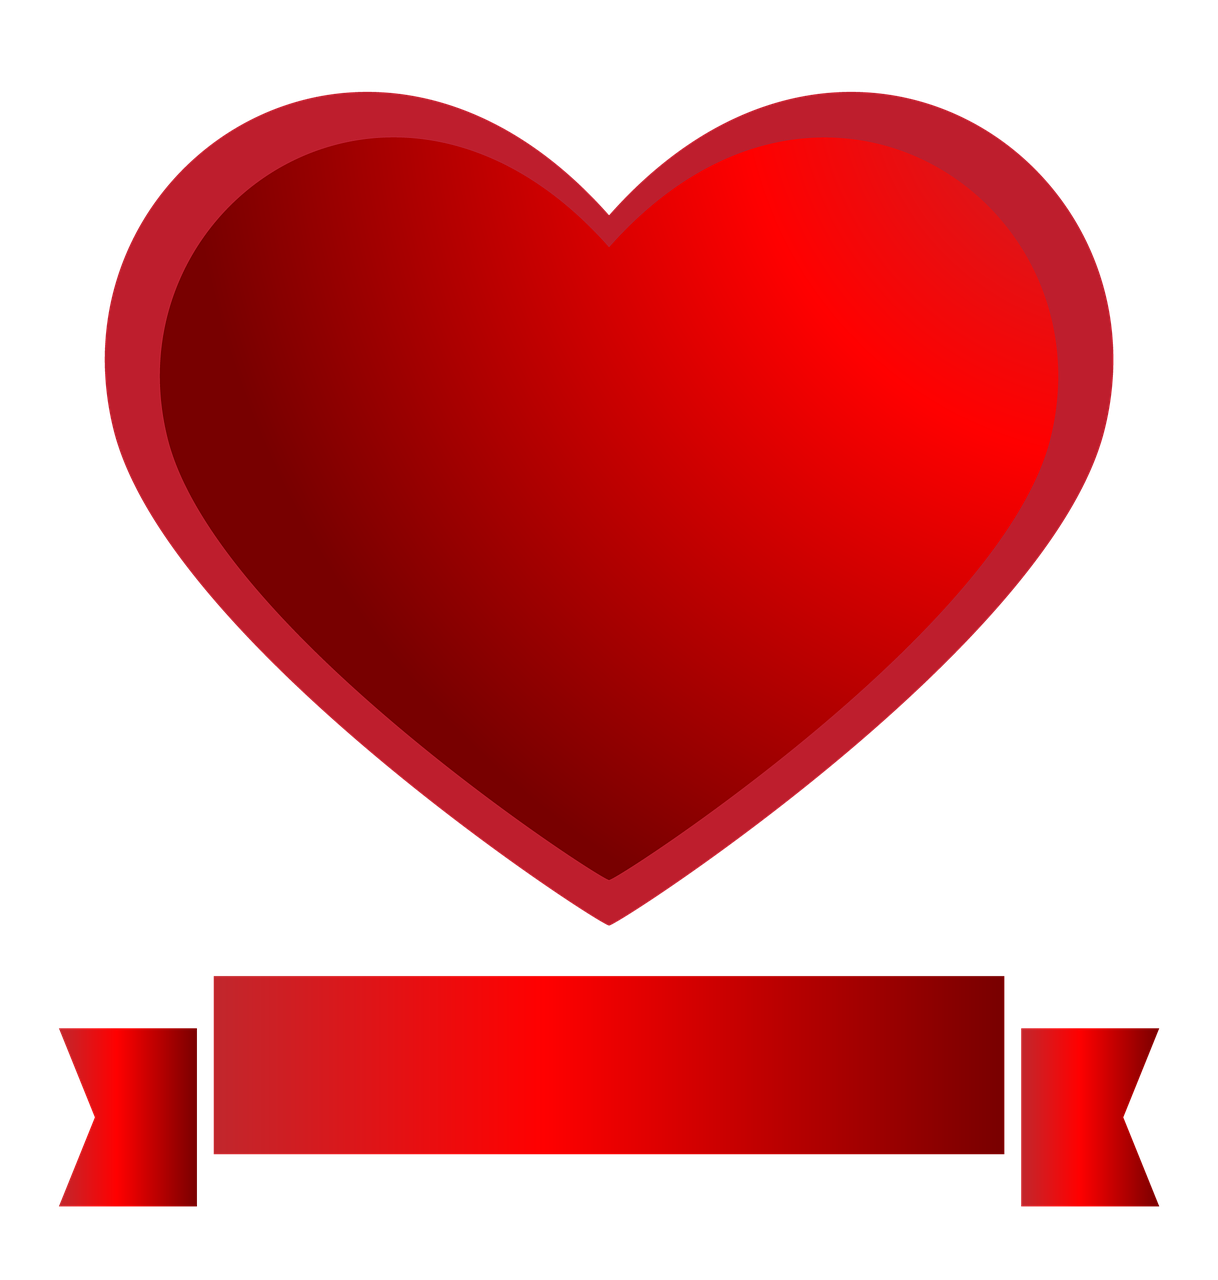 Download Free Photo Of Heart Sign Symbol Love Transparent Background From Needpix Com